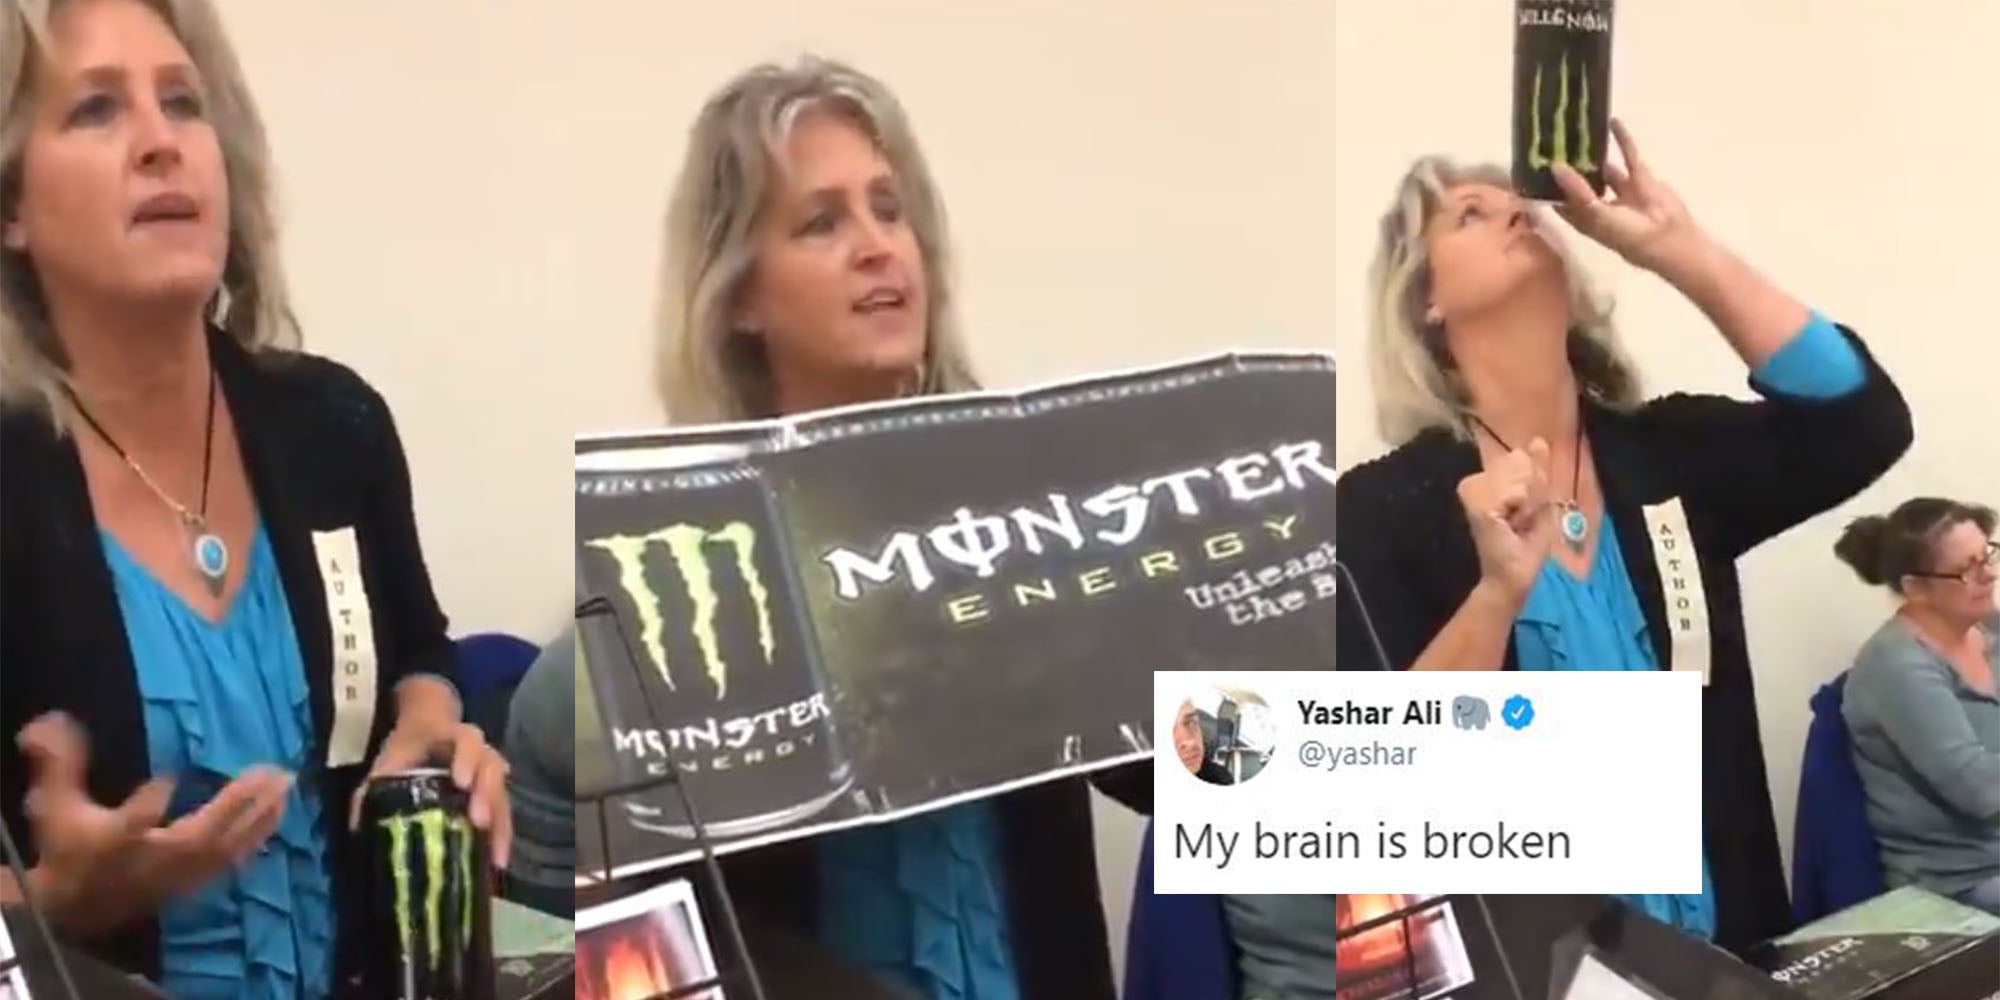 2014 Video Of Woman Claiming That Monster Energy Drinks Promote Satanism Resurfaces On Twitter Indy100 Indy100